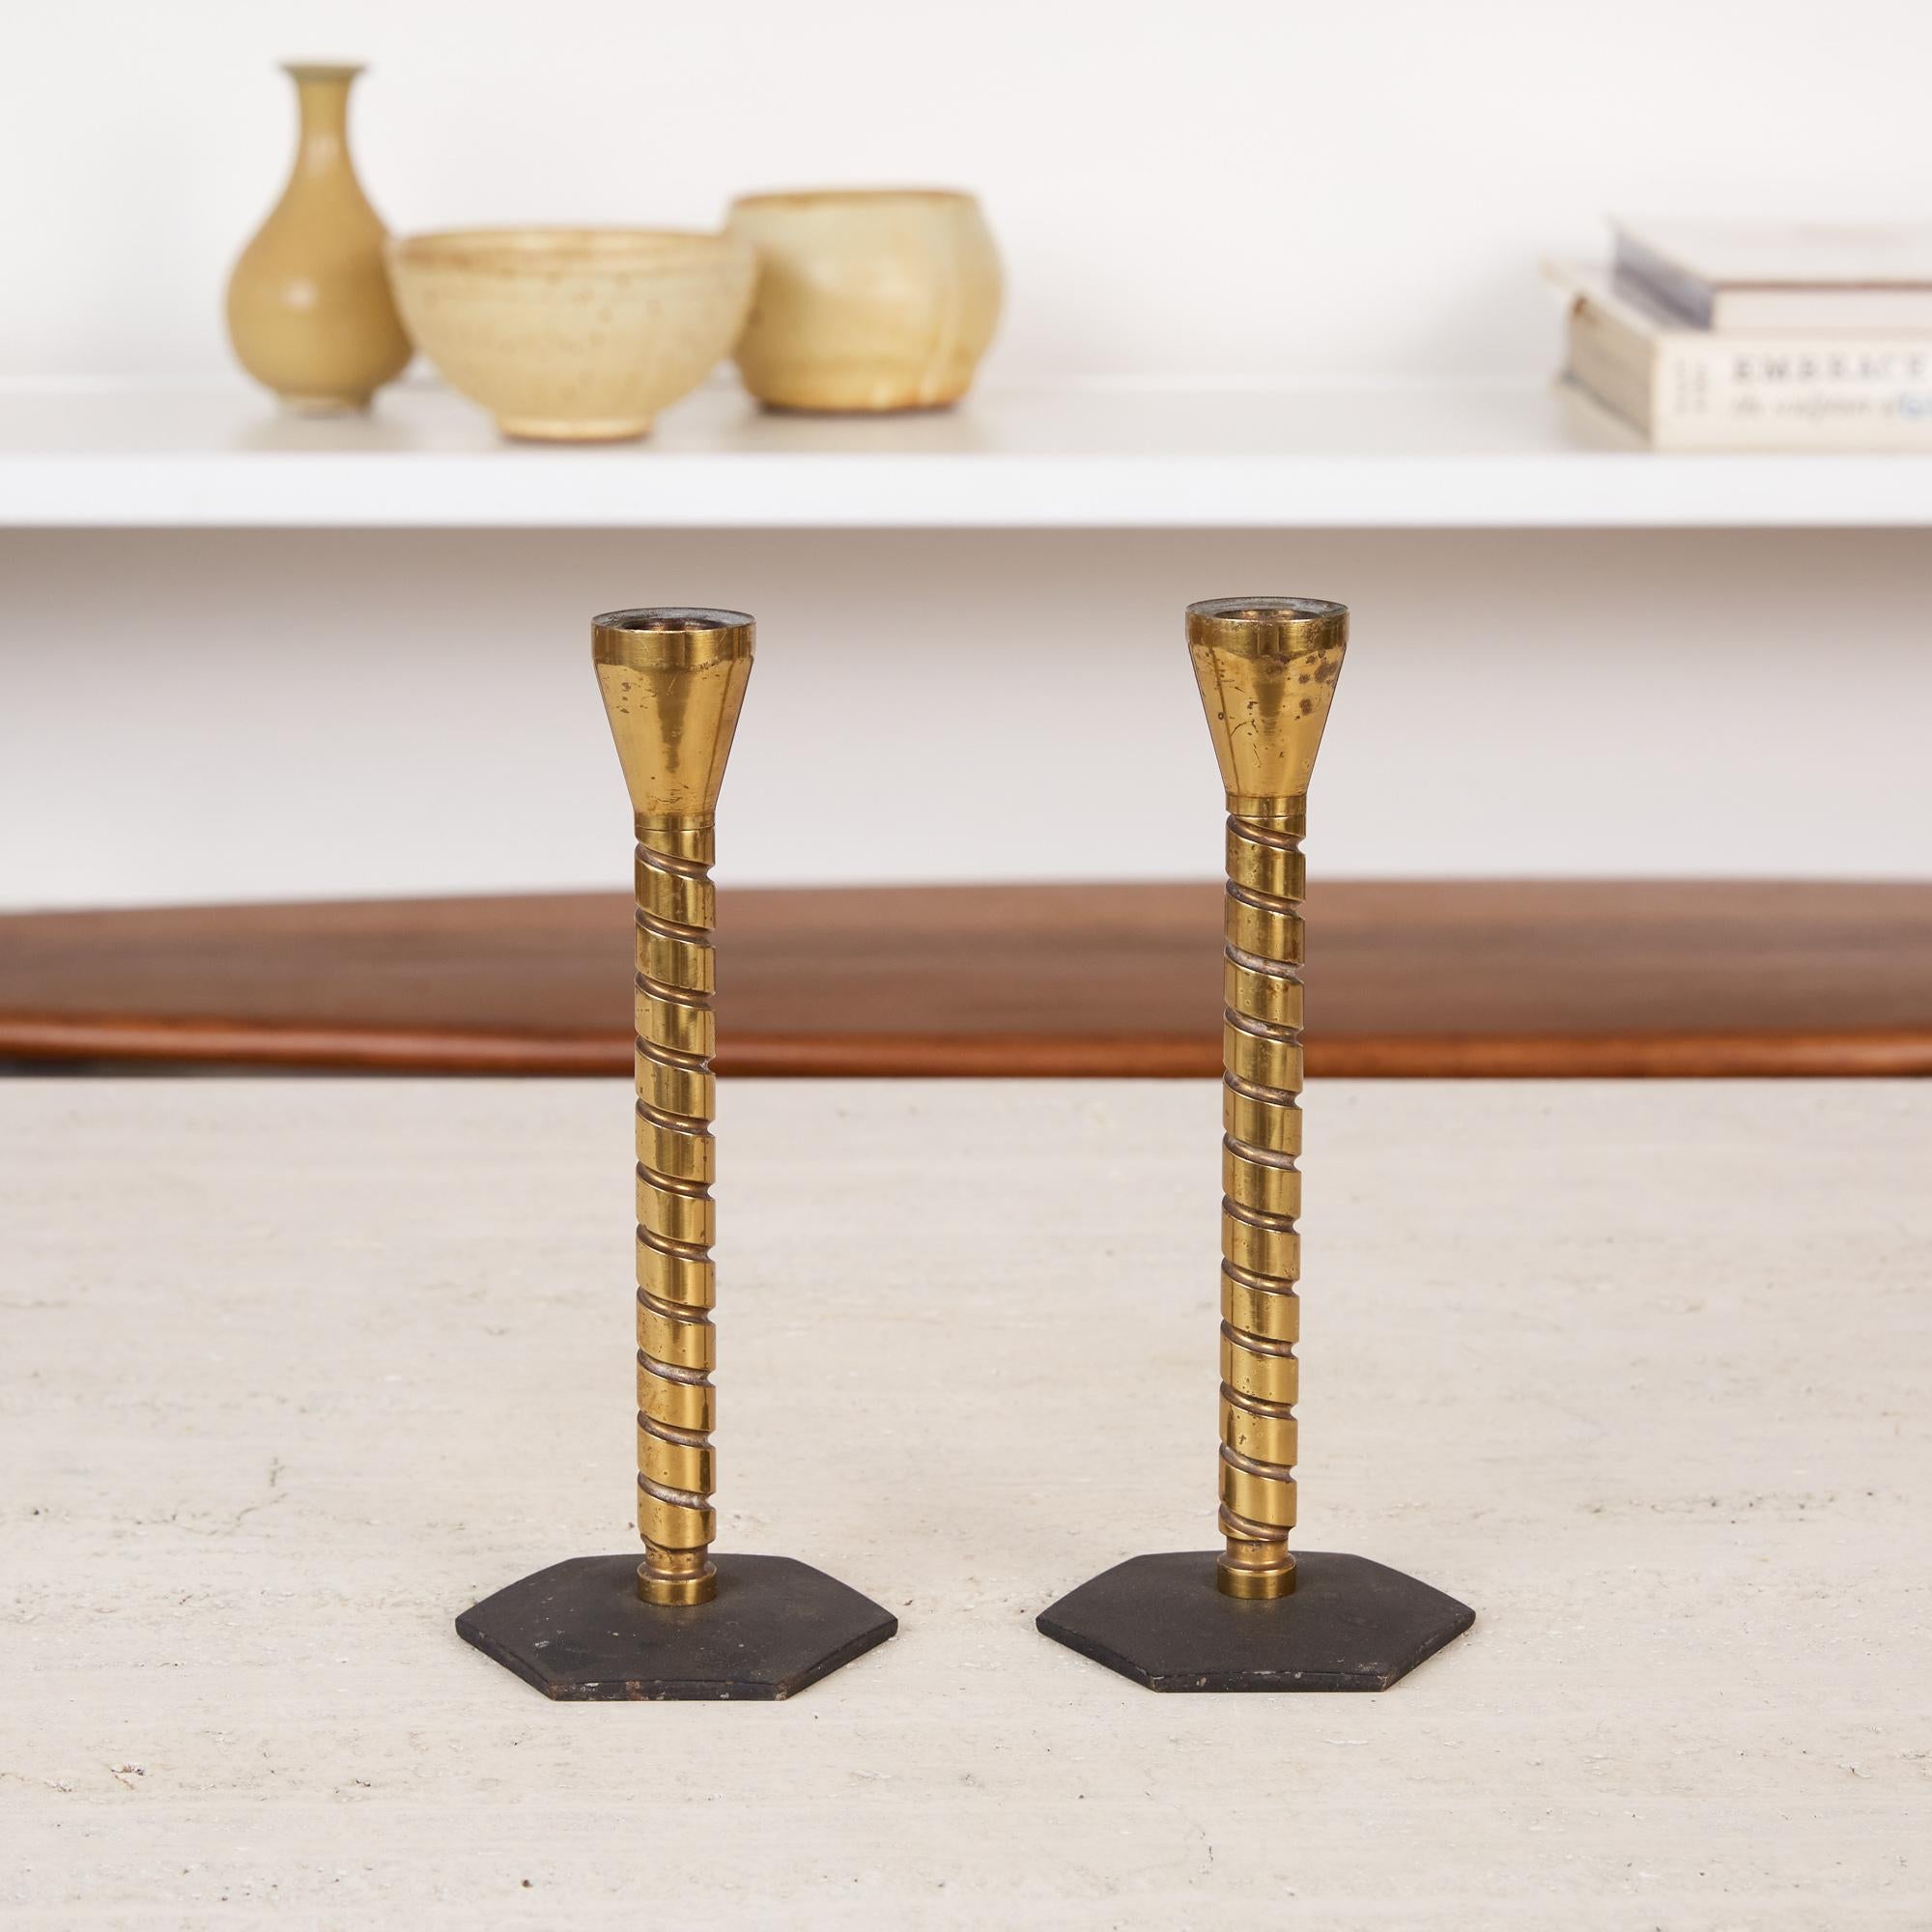 Pair of brass Machine Age candlesticks. The pair of patinated brass candlesticks feature threaded stems with thick grooves and blackened steel hexagonal bases. The Industrial Design works in a multitude of interior styles.

Dimensions: 3” width x